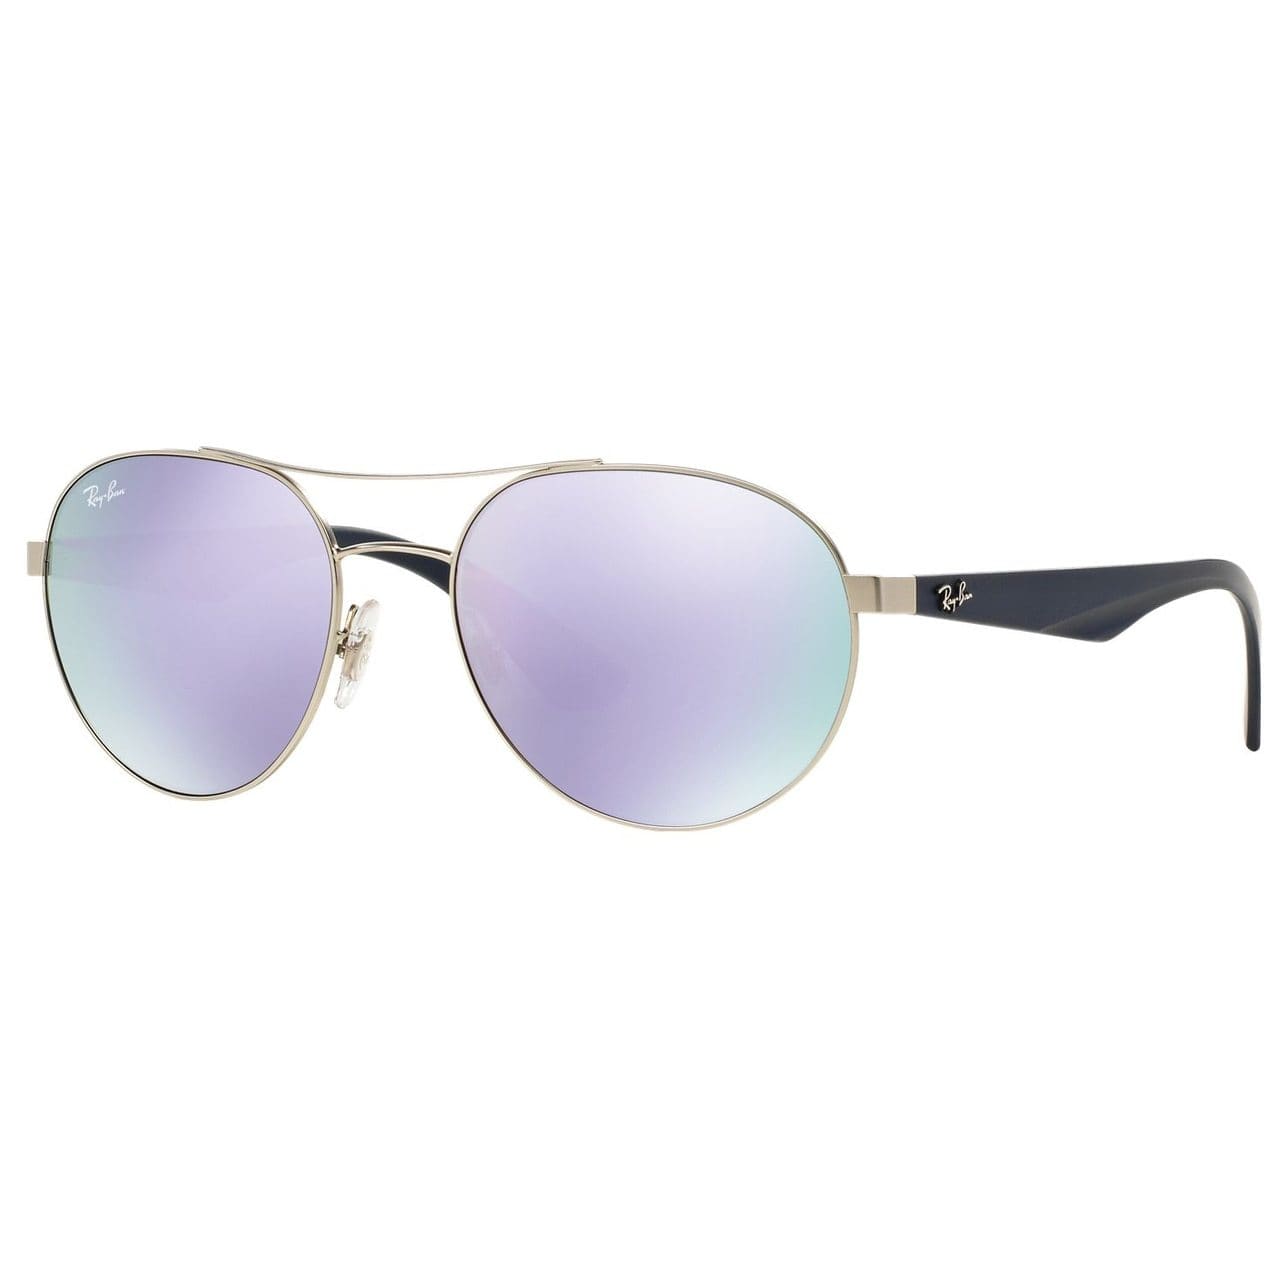 Ray-Ban RB3536 019/4V Round Lilac Mirror Silver / Blue Frame Sunglasses 8053672507485